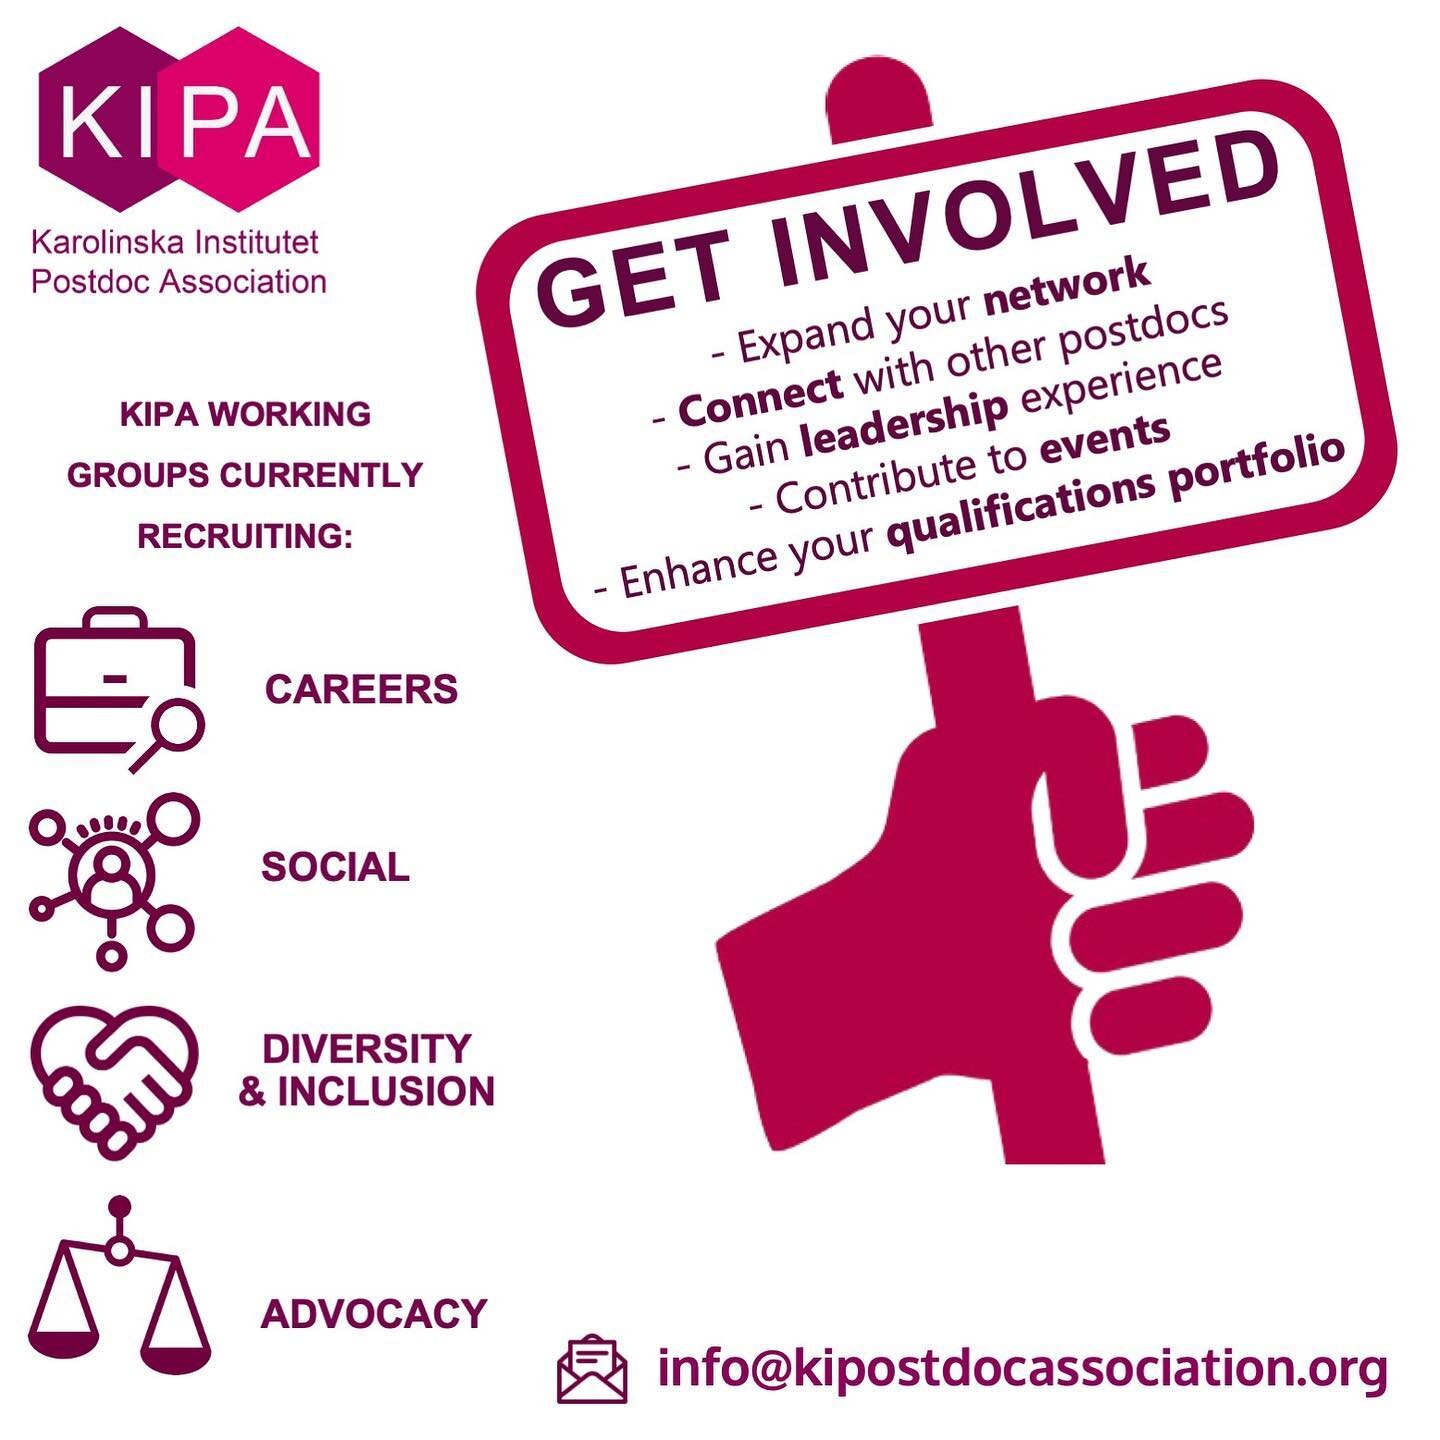 KIPA needs volunteers! Come join us at KIPA! It's a fun, meaningful, and fulfiling experience. Expand your network, gain additional skills professionally and socially, and create your impact on the KI postdoc community. Reach us at info@kipostdocasso